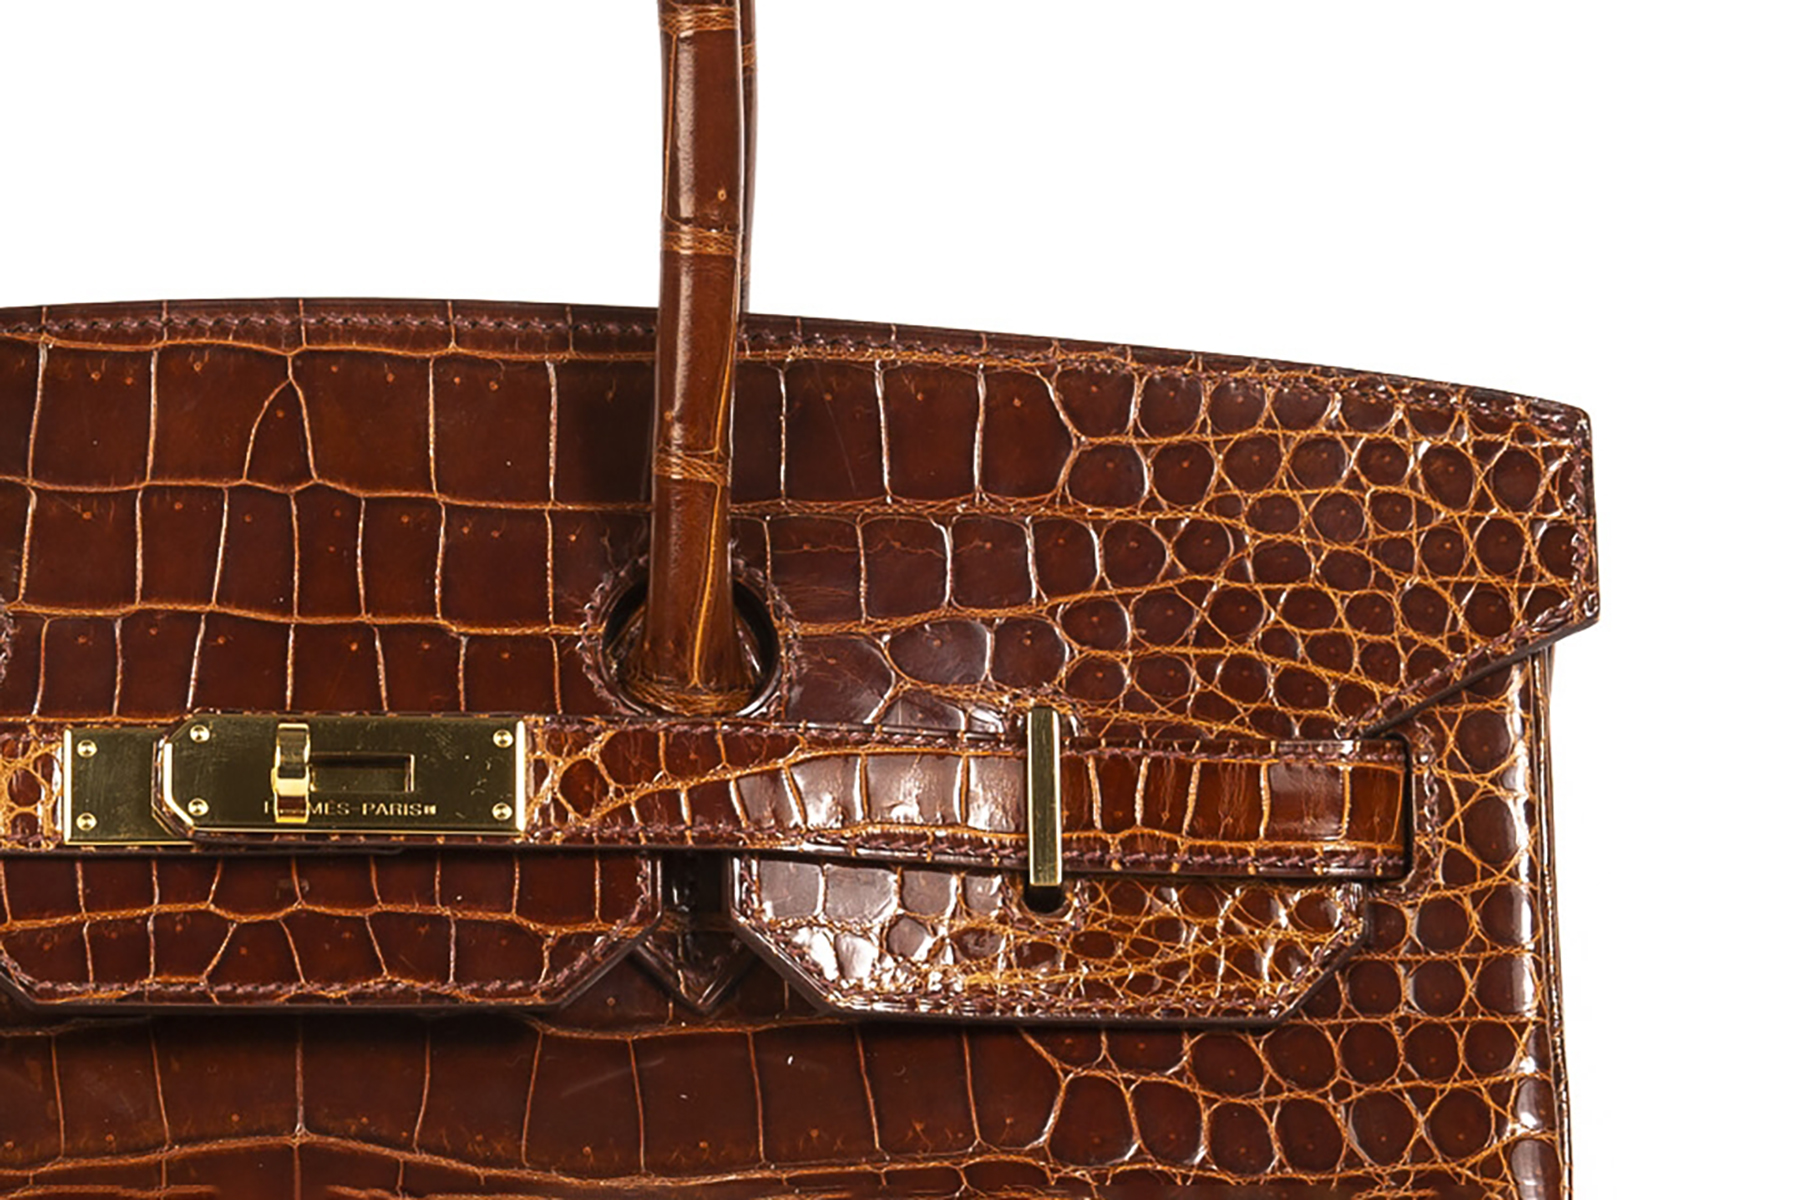 Hermès leather types: The great overview with valuable insider details. -  Handbag Spa & Shop